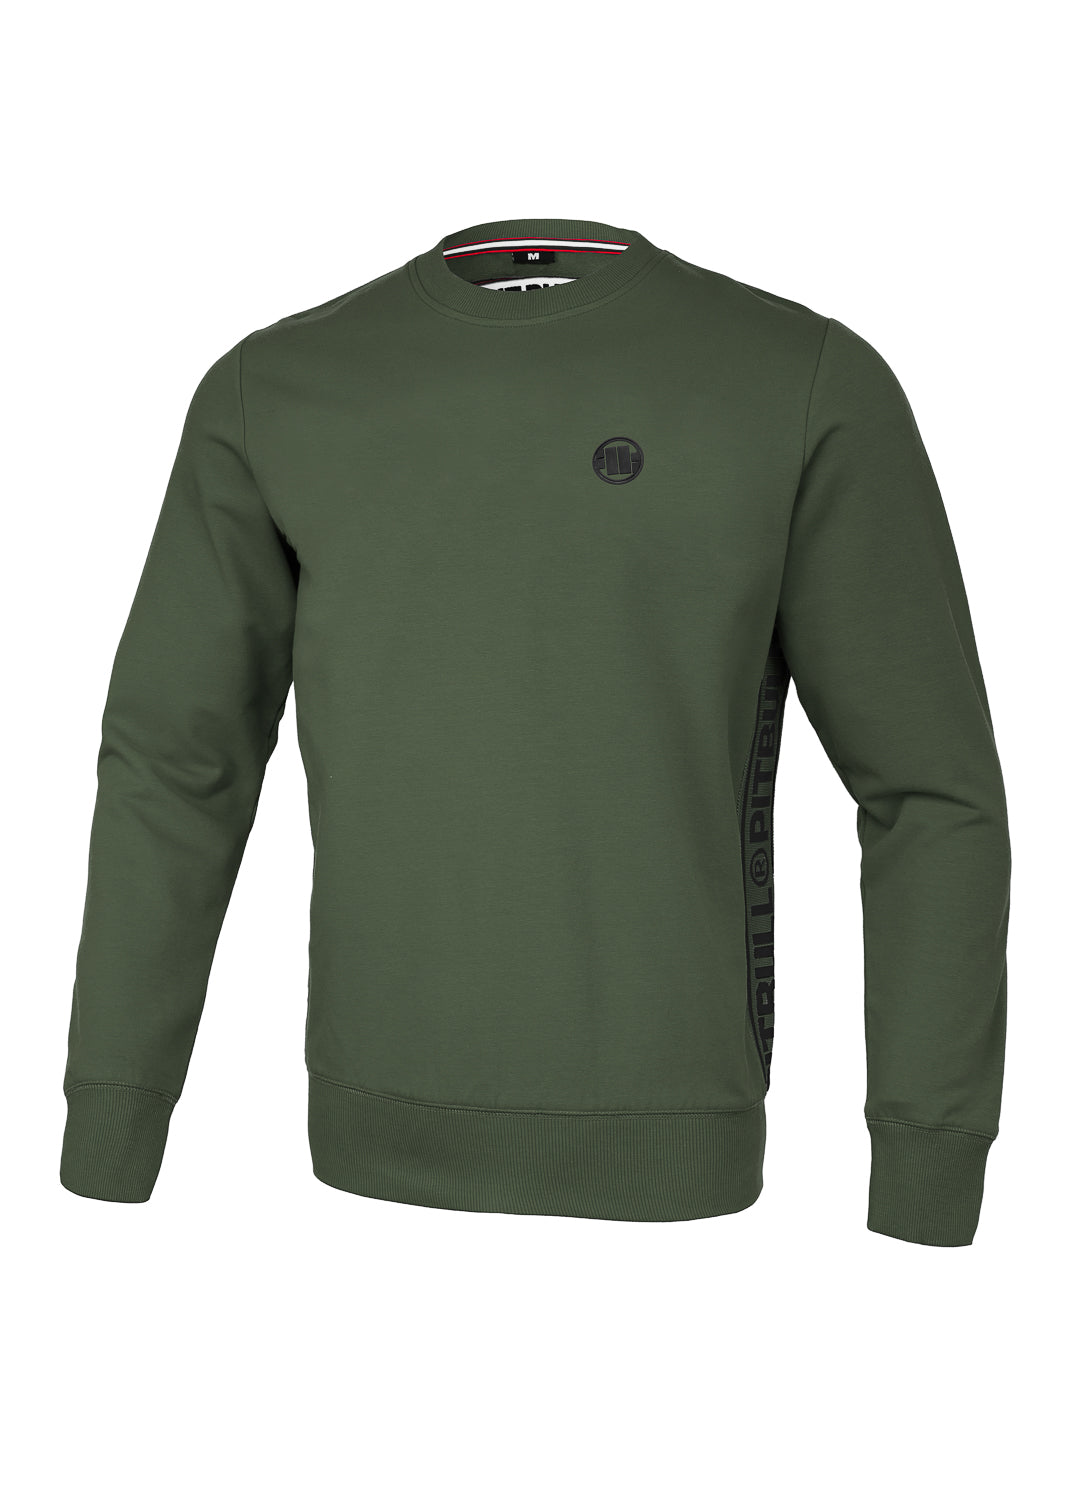 Crewneck French Terry ASCOT Olive